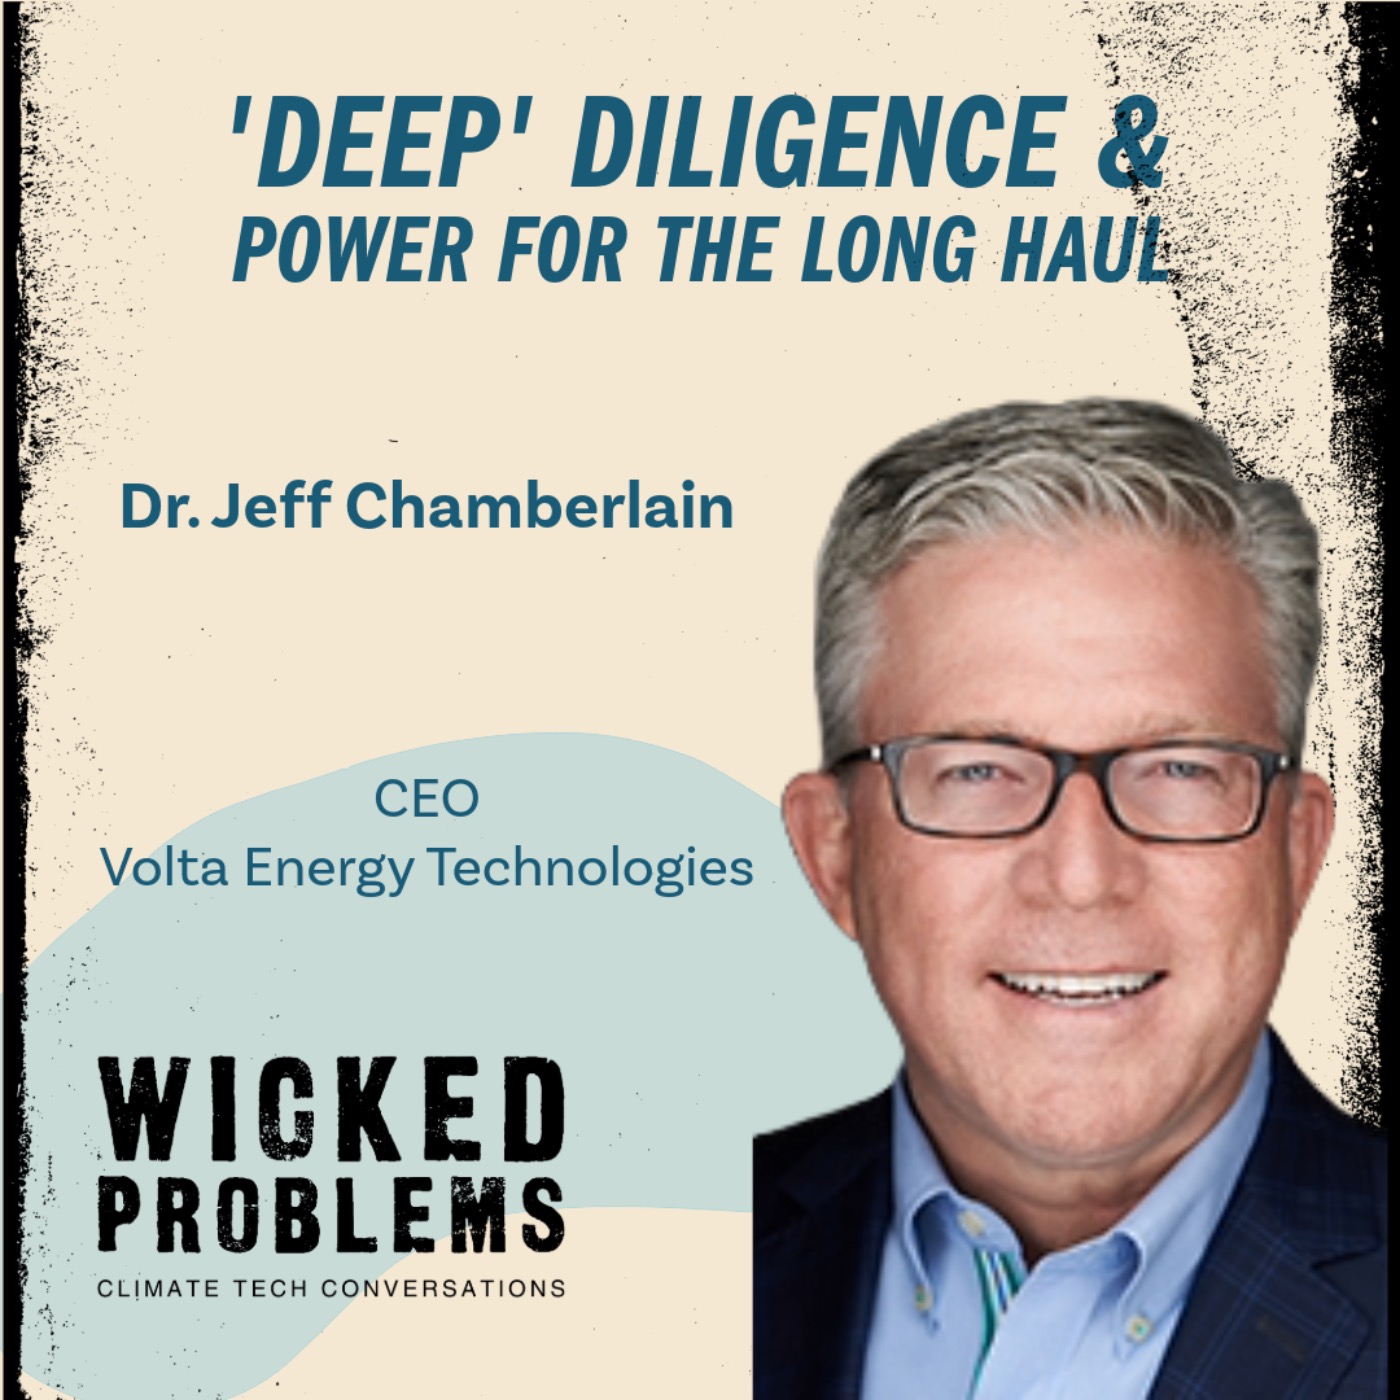 'Deep' Diligence & Power for the Long Haul